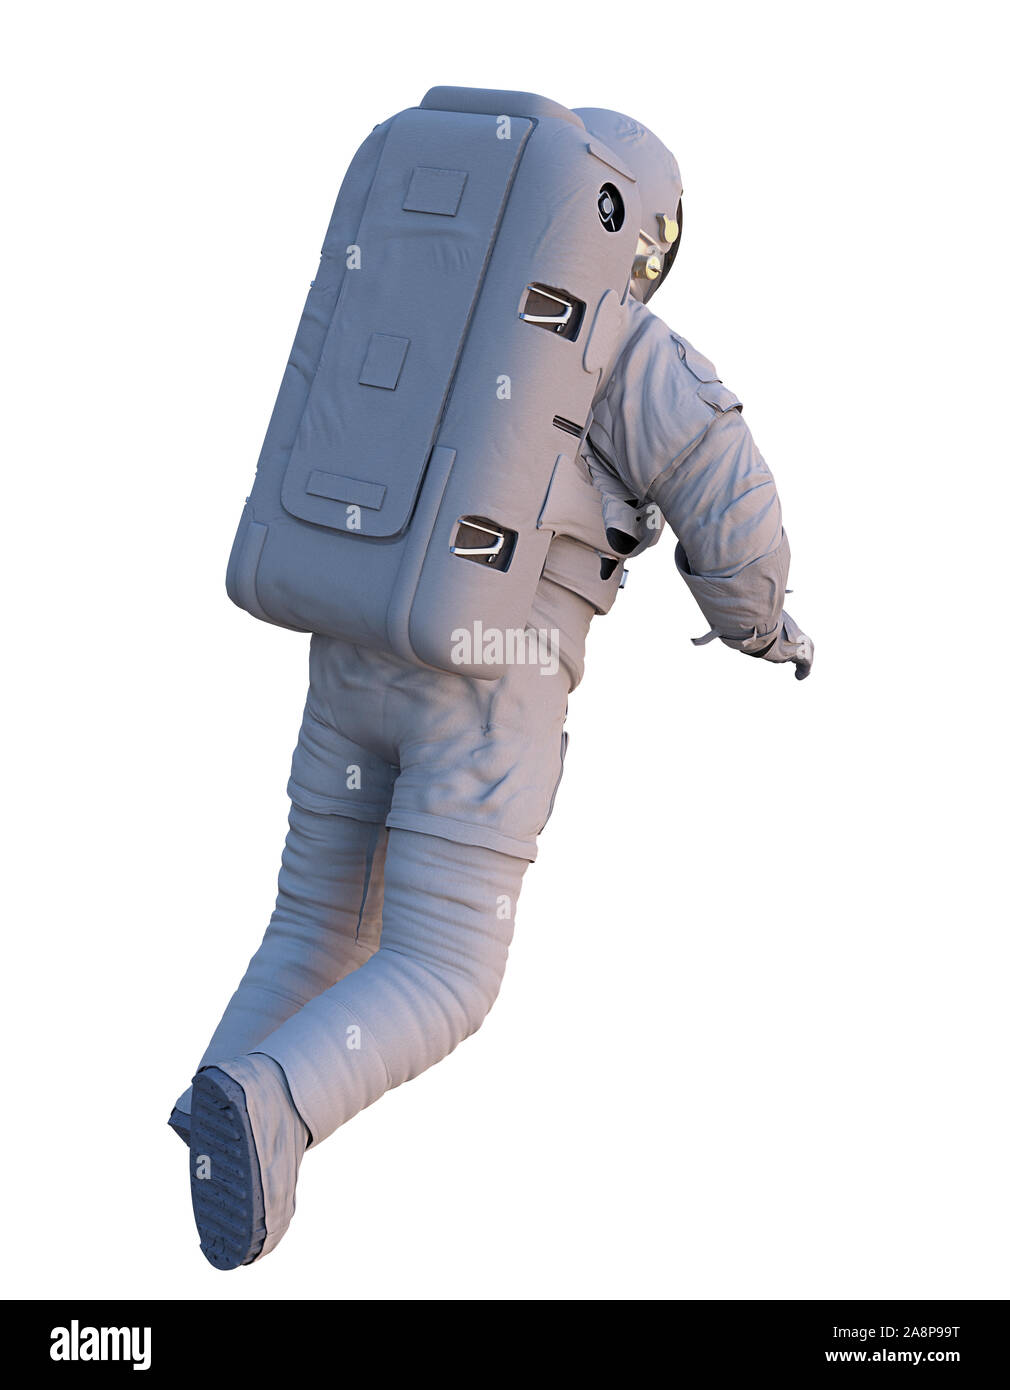 flying astronaut, back view, isolated on white background Stock Photo